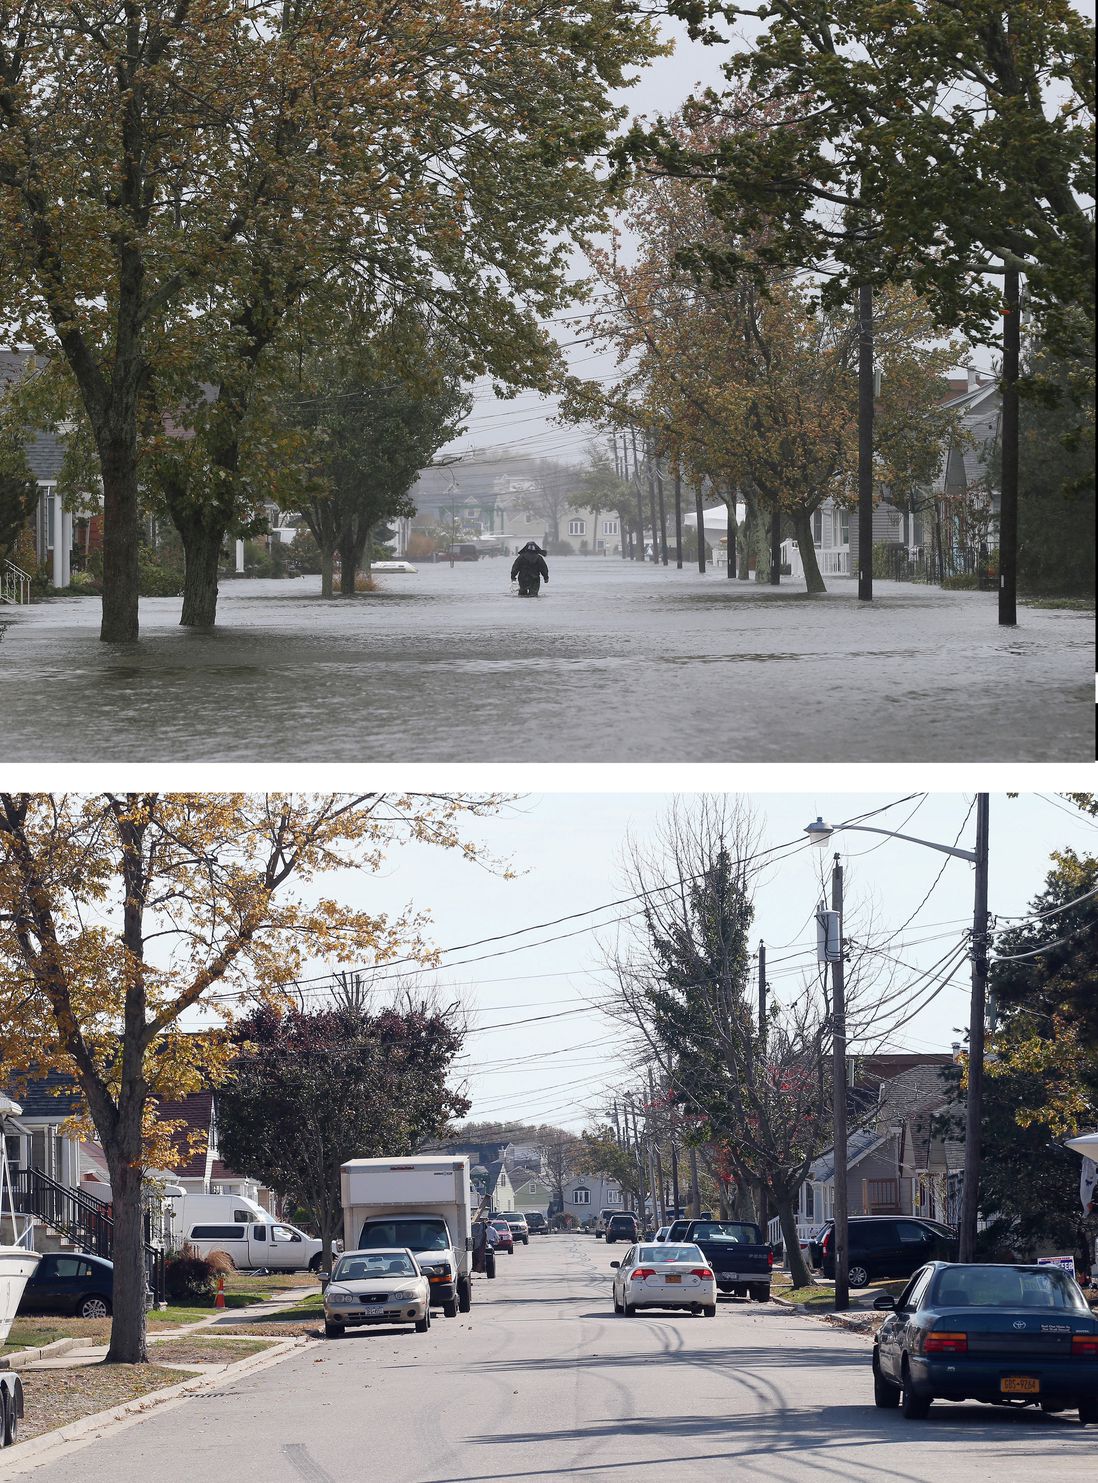 [Top] A lone figure makes his way down South 9th Street as high tide, rain and winds flood local streets on October 29, 2012 in Lindenhurst, New York. [Bottom] A scenic view of South 9th Street as photographed almost one year following Superstorm Sandy on October 22, 2013 in Lindenhurst, New York.